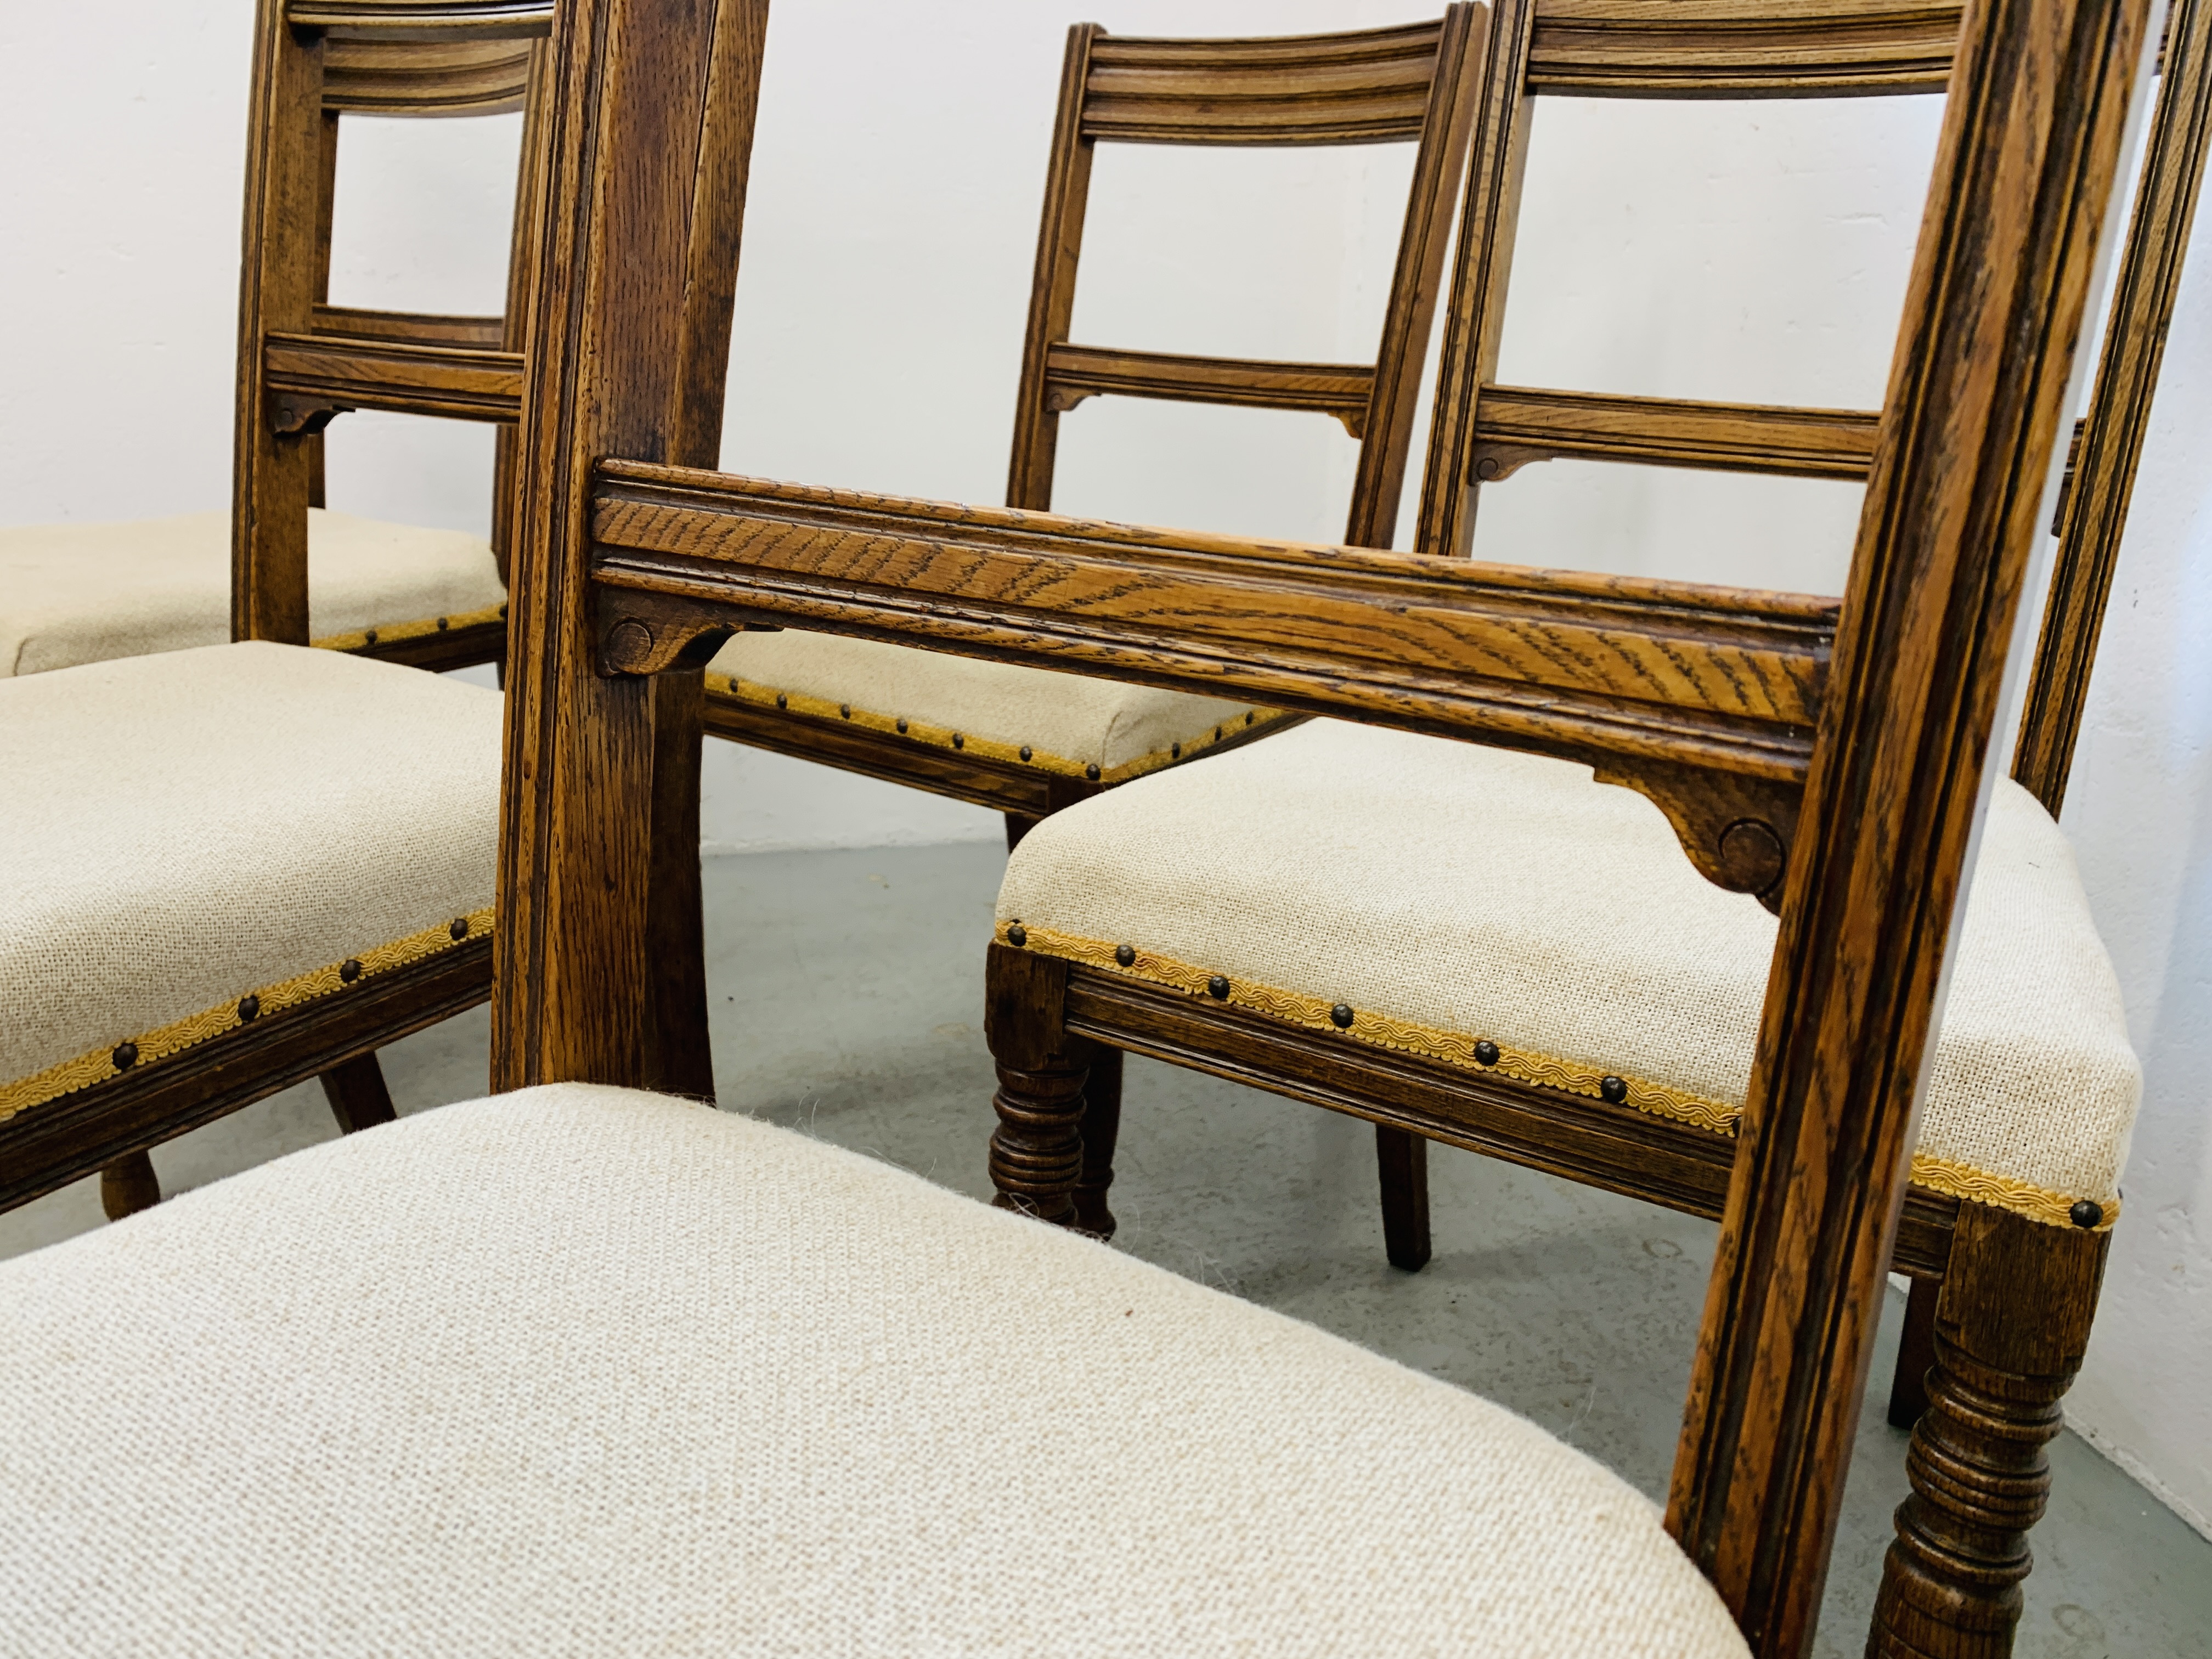 A SET OF 6 OAK FRAMED EDWARDIAN DINING CHAIRS ALONG WITH A SOLID OAK GATELEG DINING TABLE - Image 5 of 20